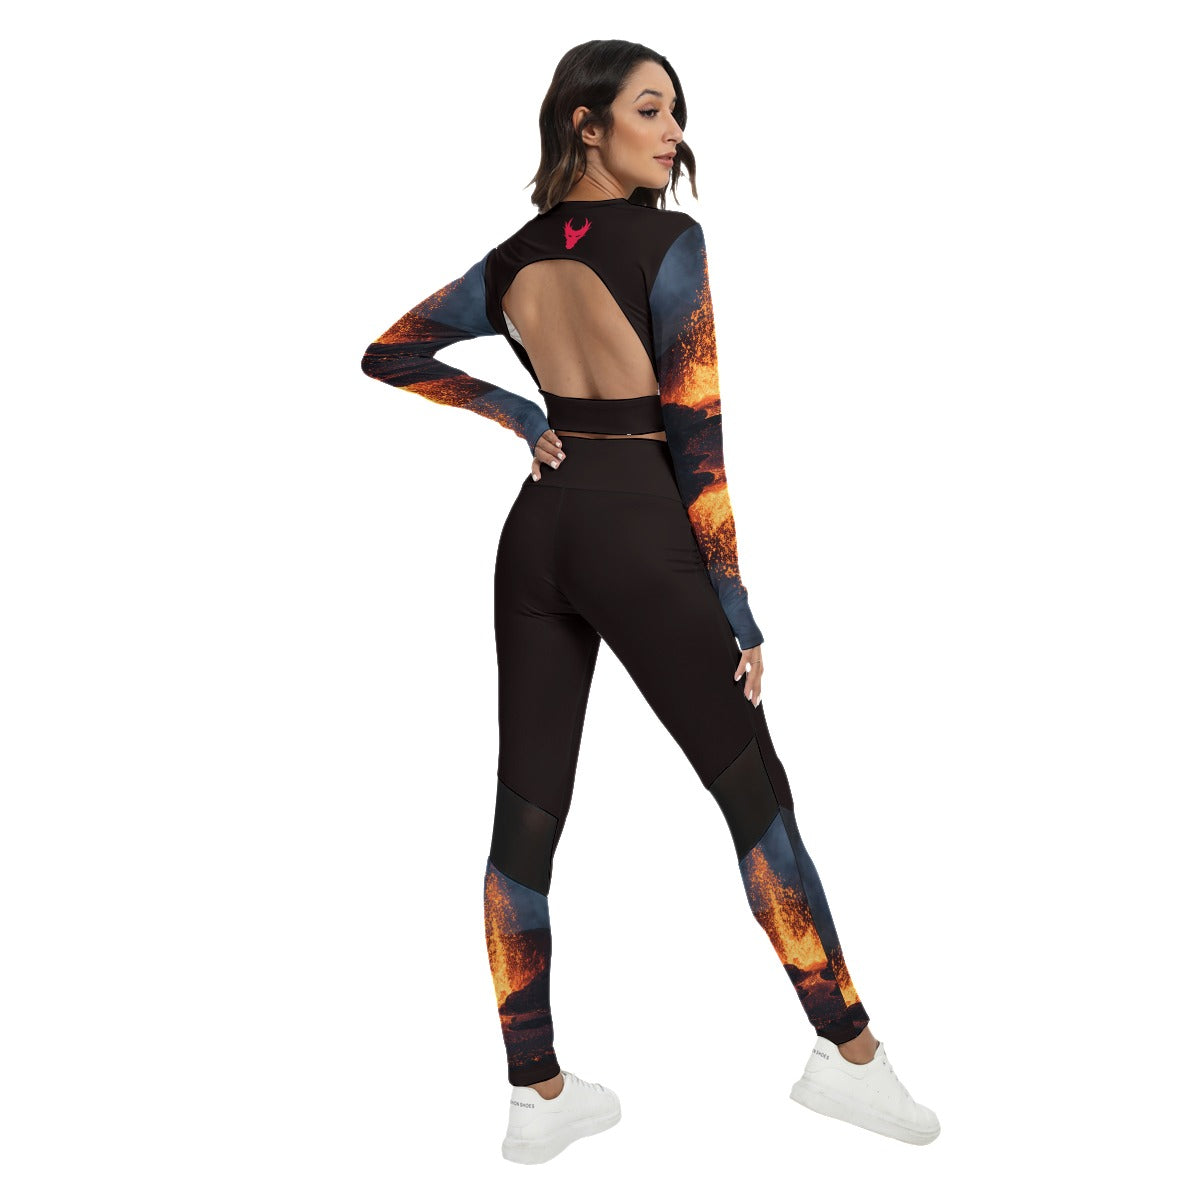 Fired up dragon fruit Women's Sport Set With Backless Top And Leggings